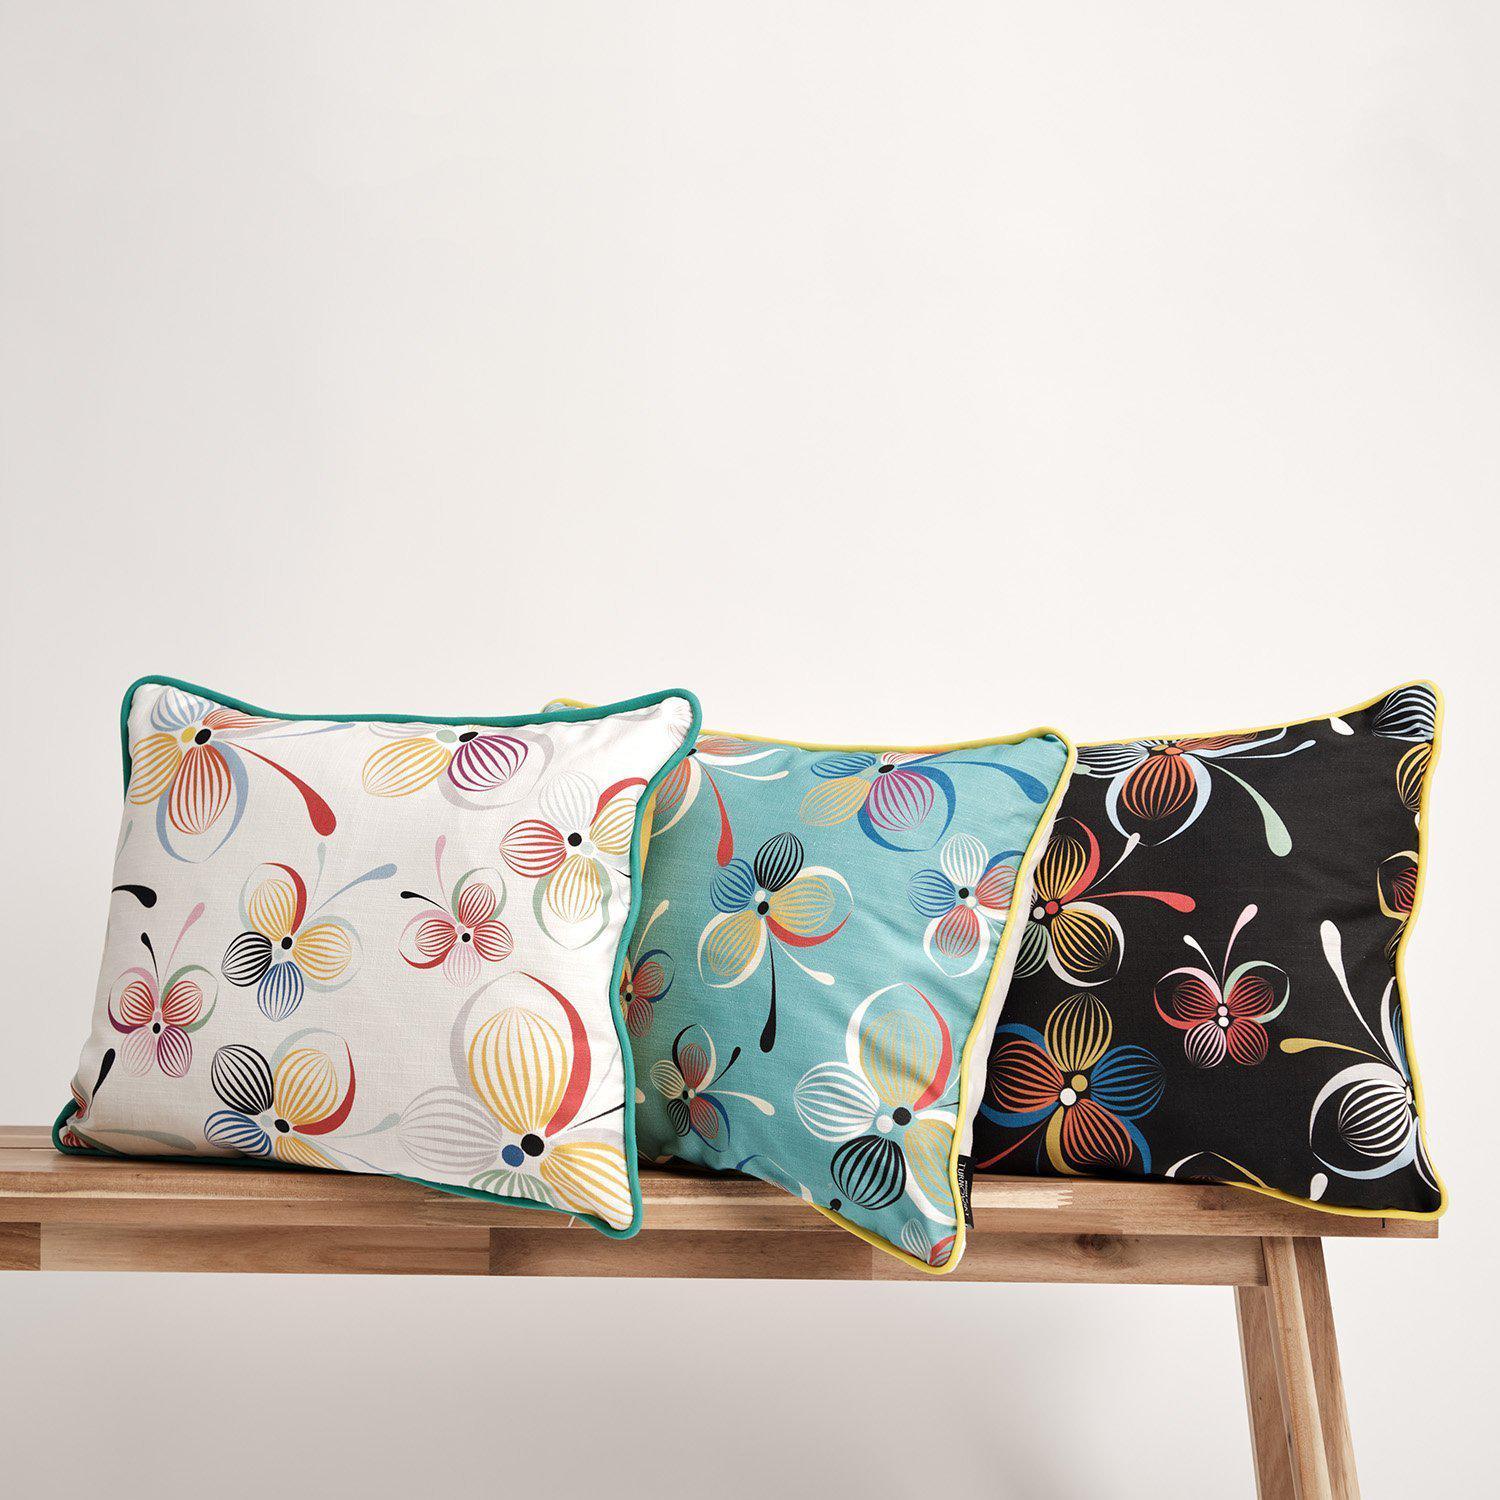 Bubbly Butterflies (White) - Funky Art Cushion - Perfect Day - House Of Turnowsky Pillows - Handmade Cushions UK - WeLoveCushions